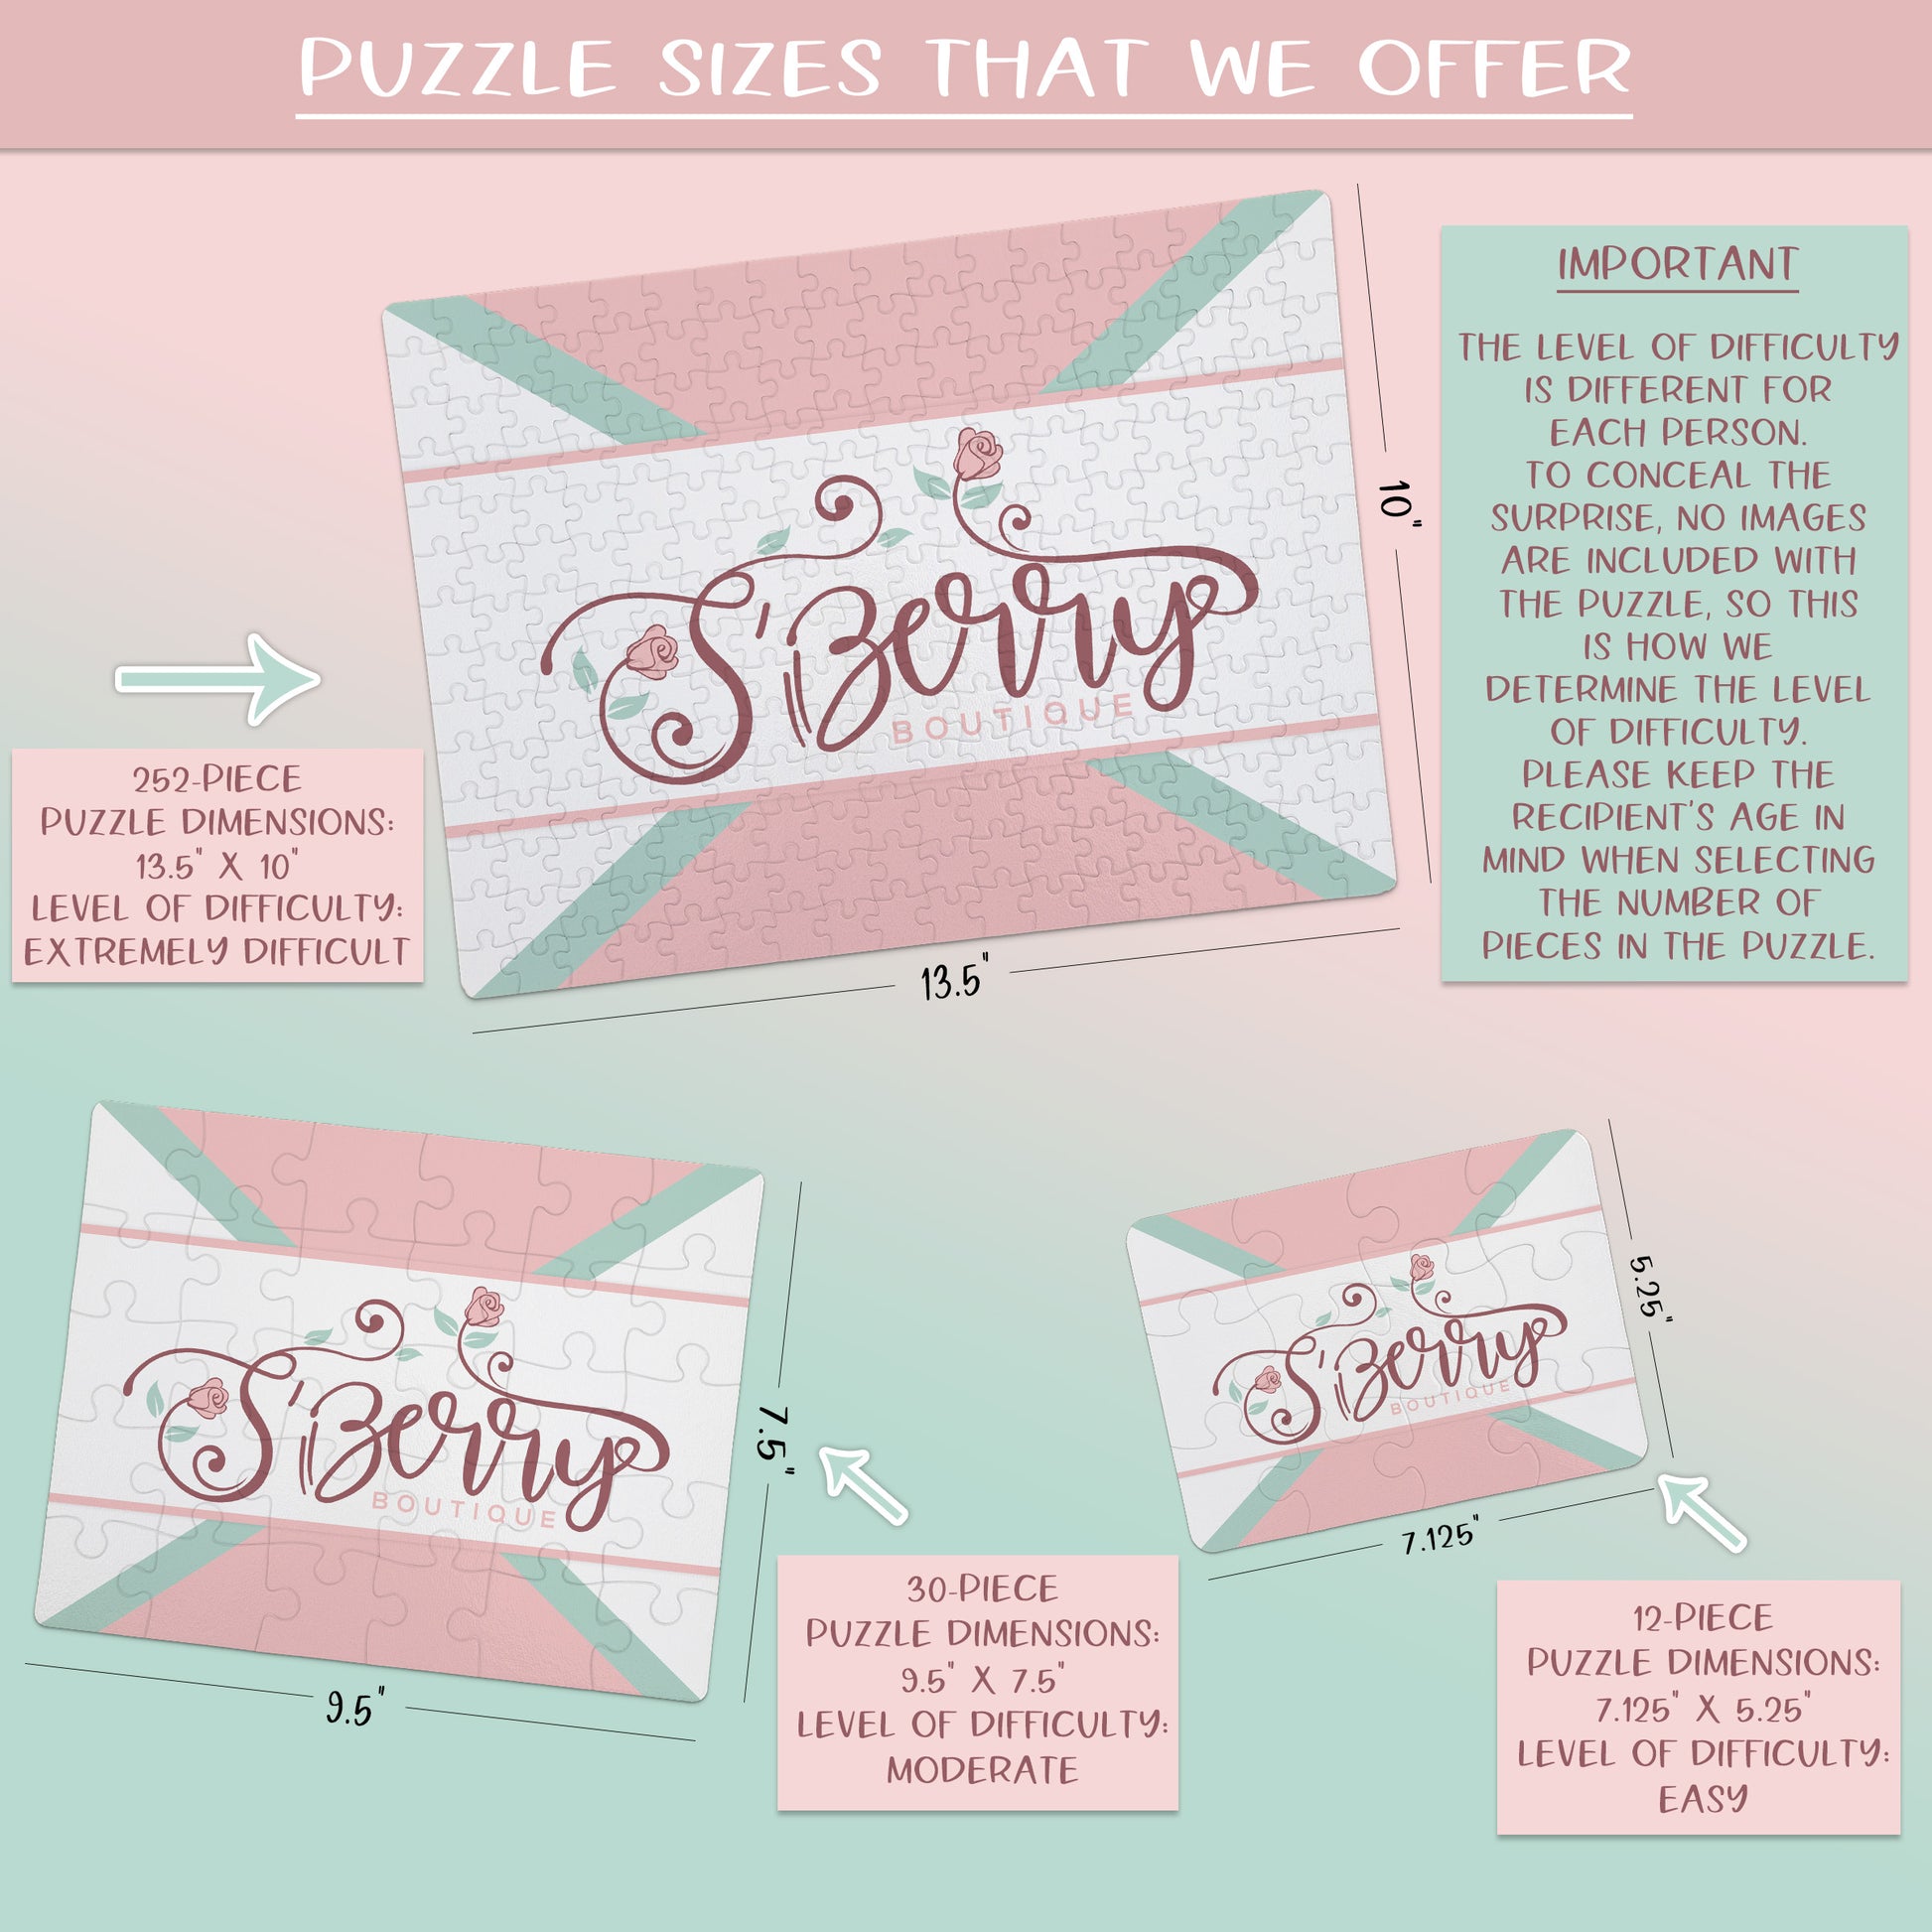 Create Your Own Puzzle - Mountains - CYOP0013 | S'Berry Boutique